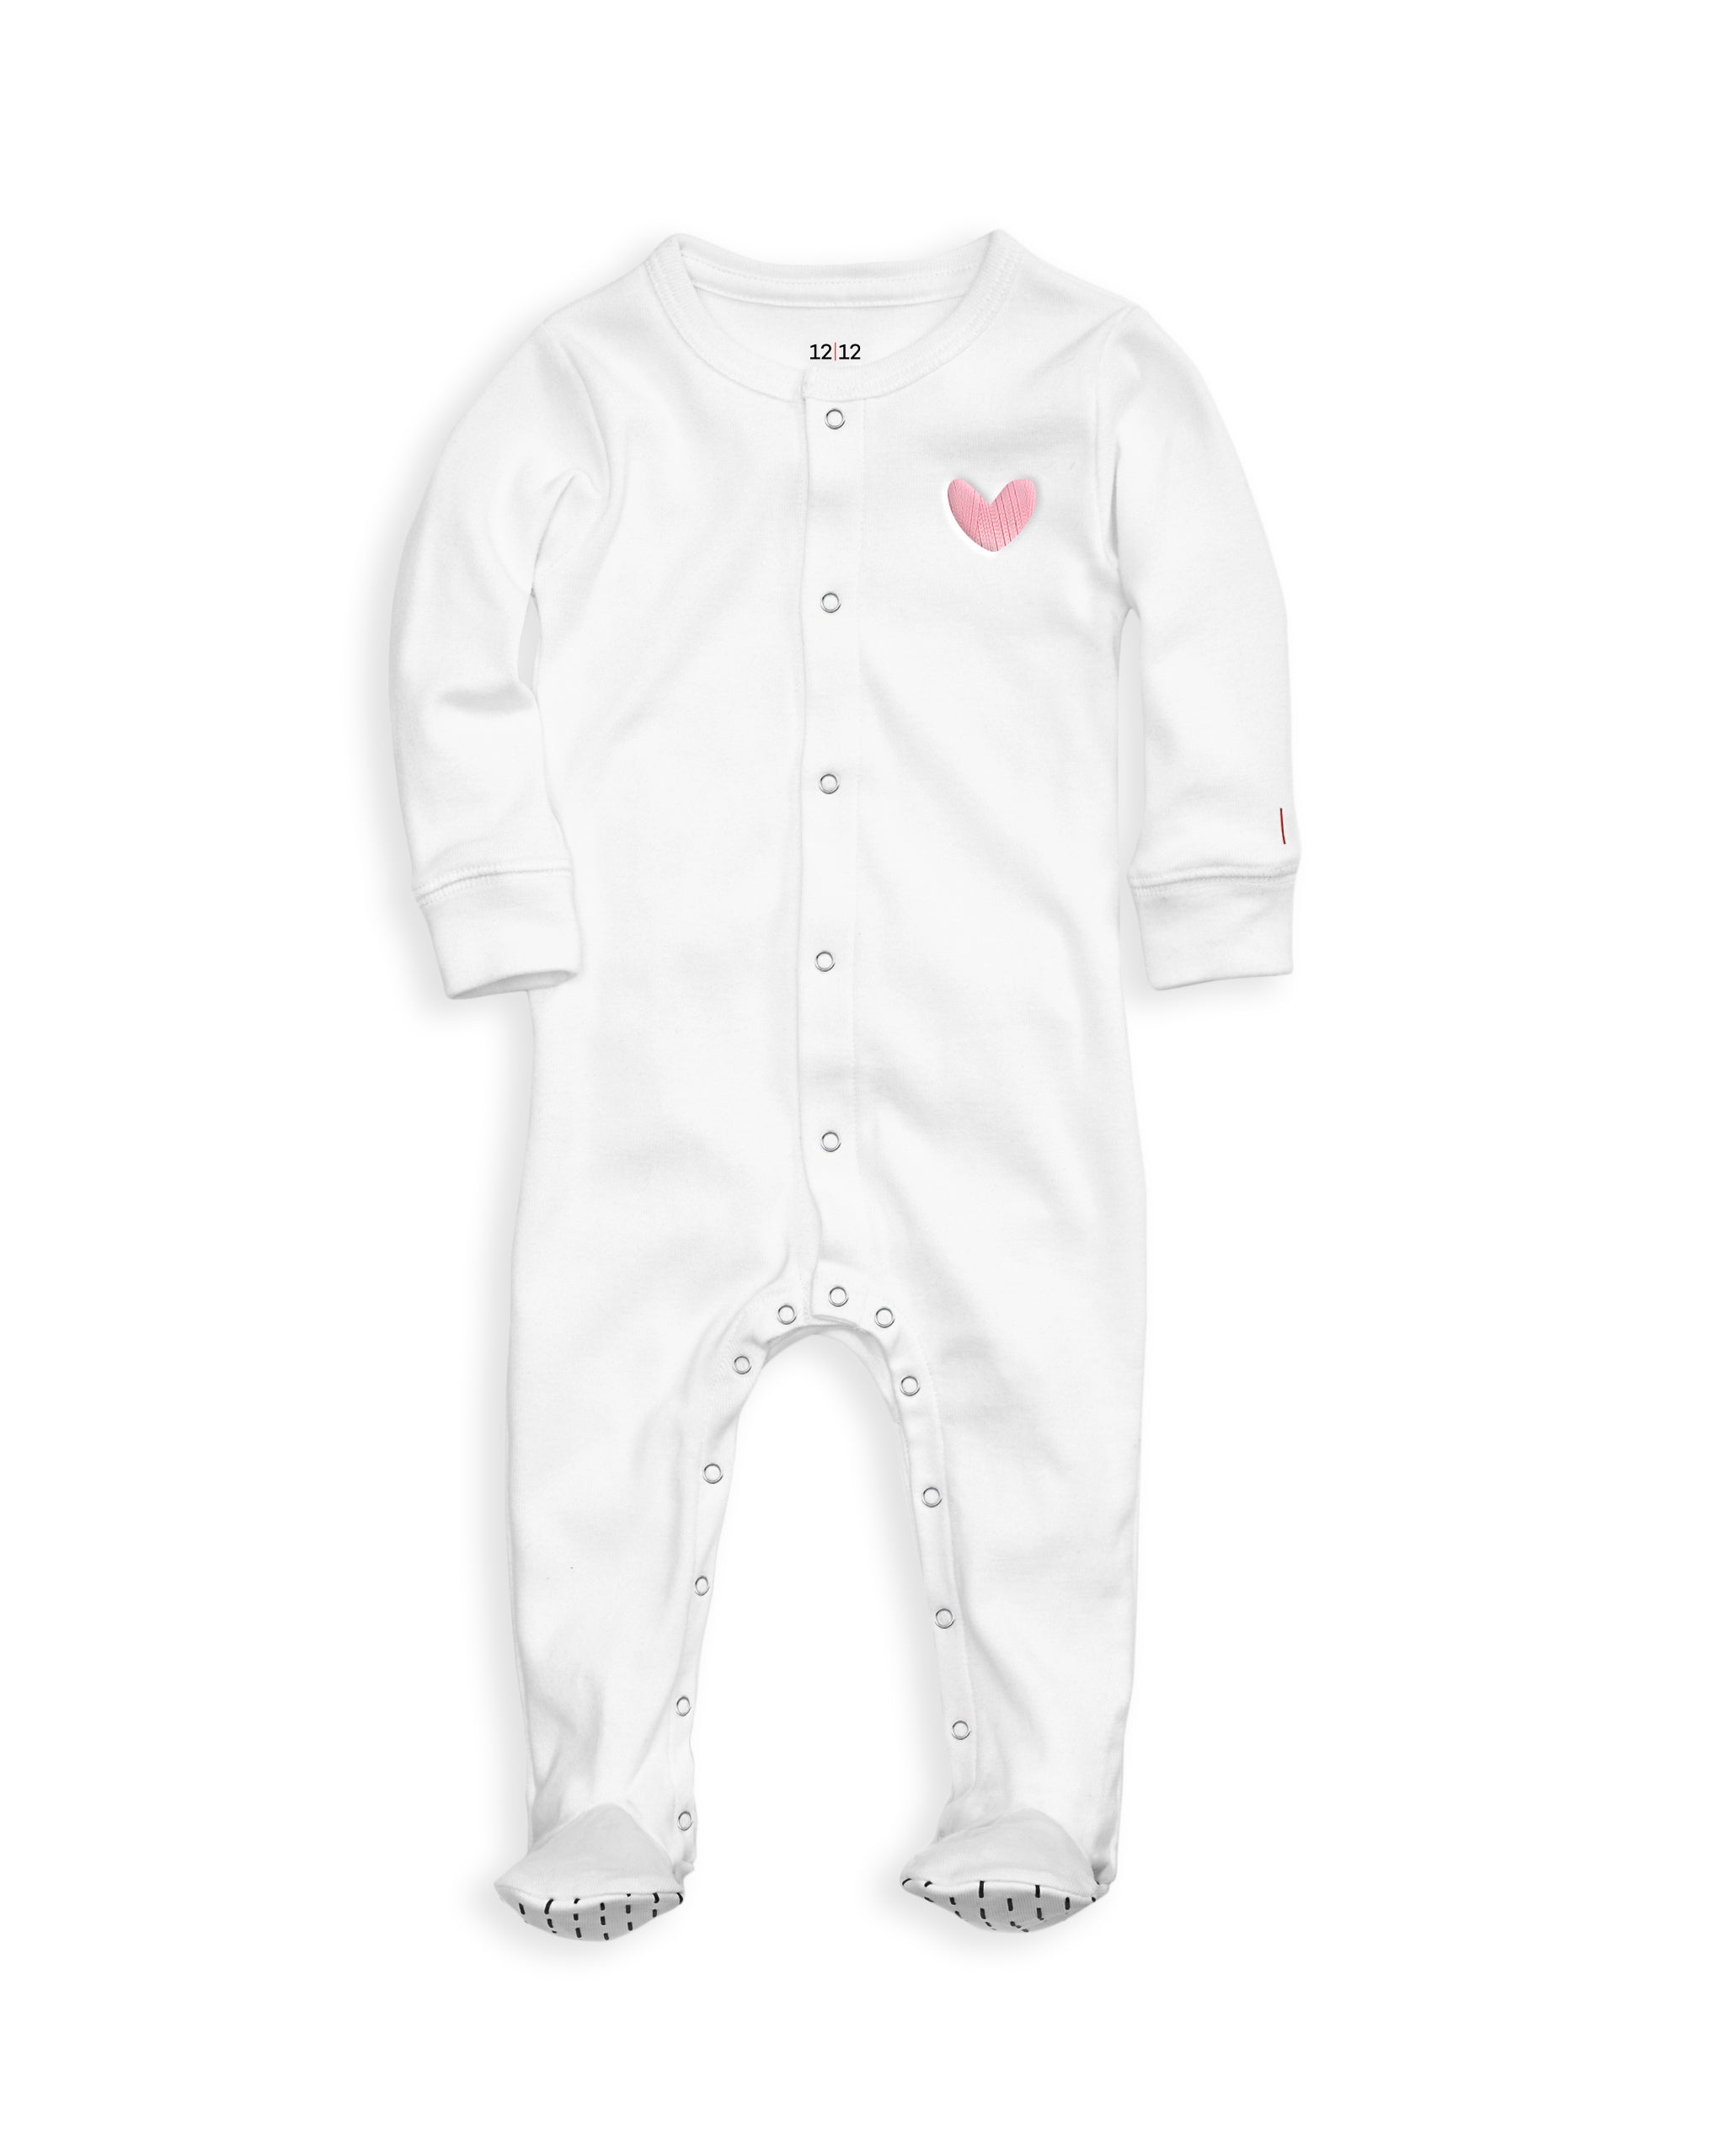 The Organic Embroidered Snap Footie [White with Pink Heart]